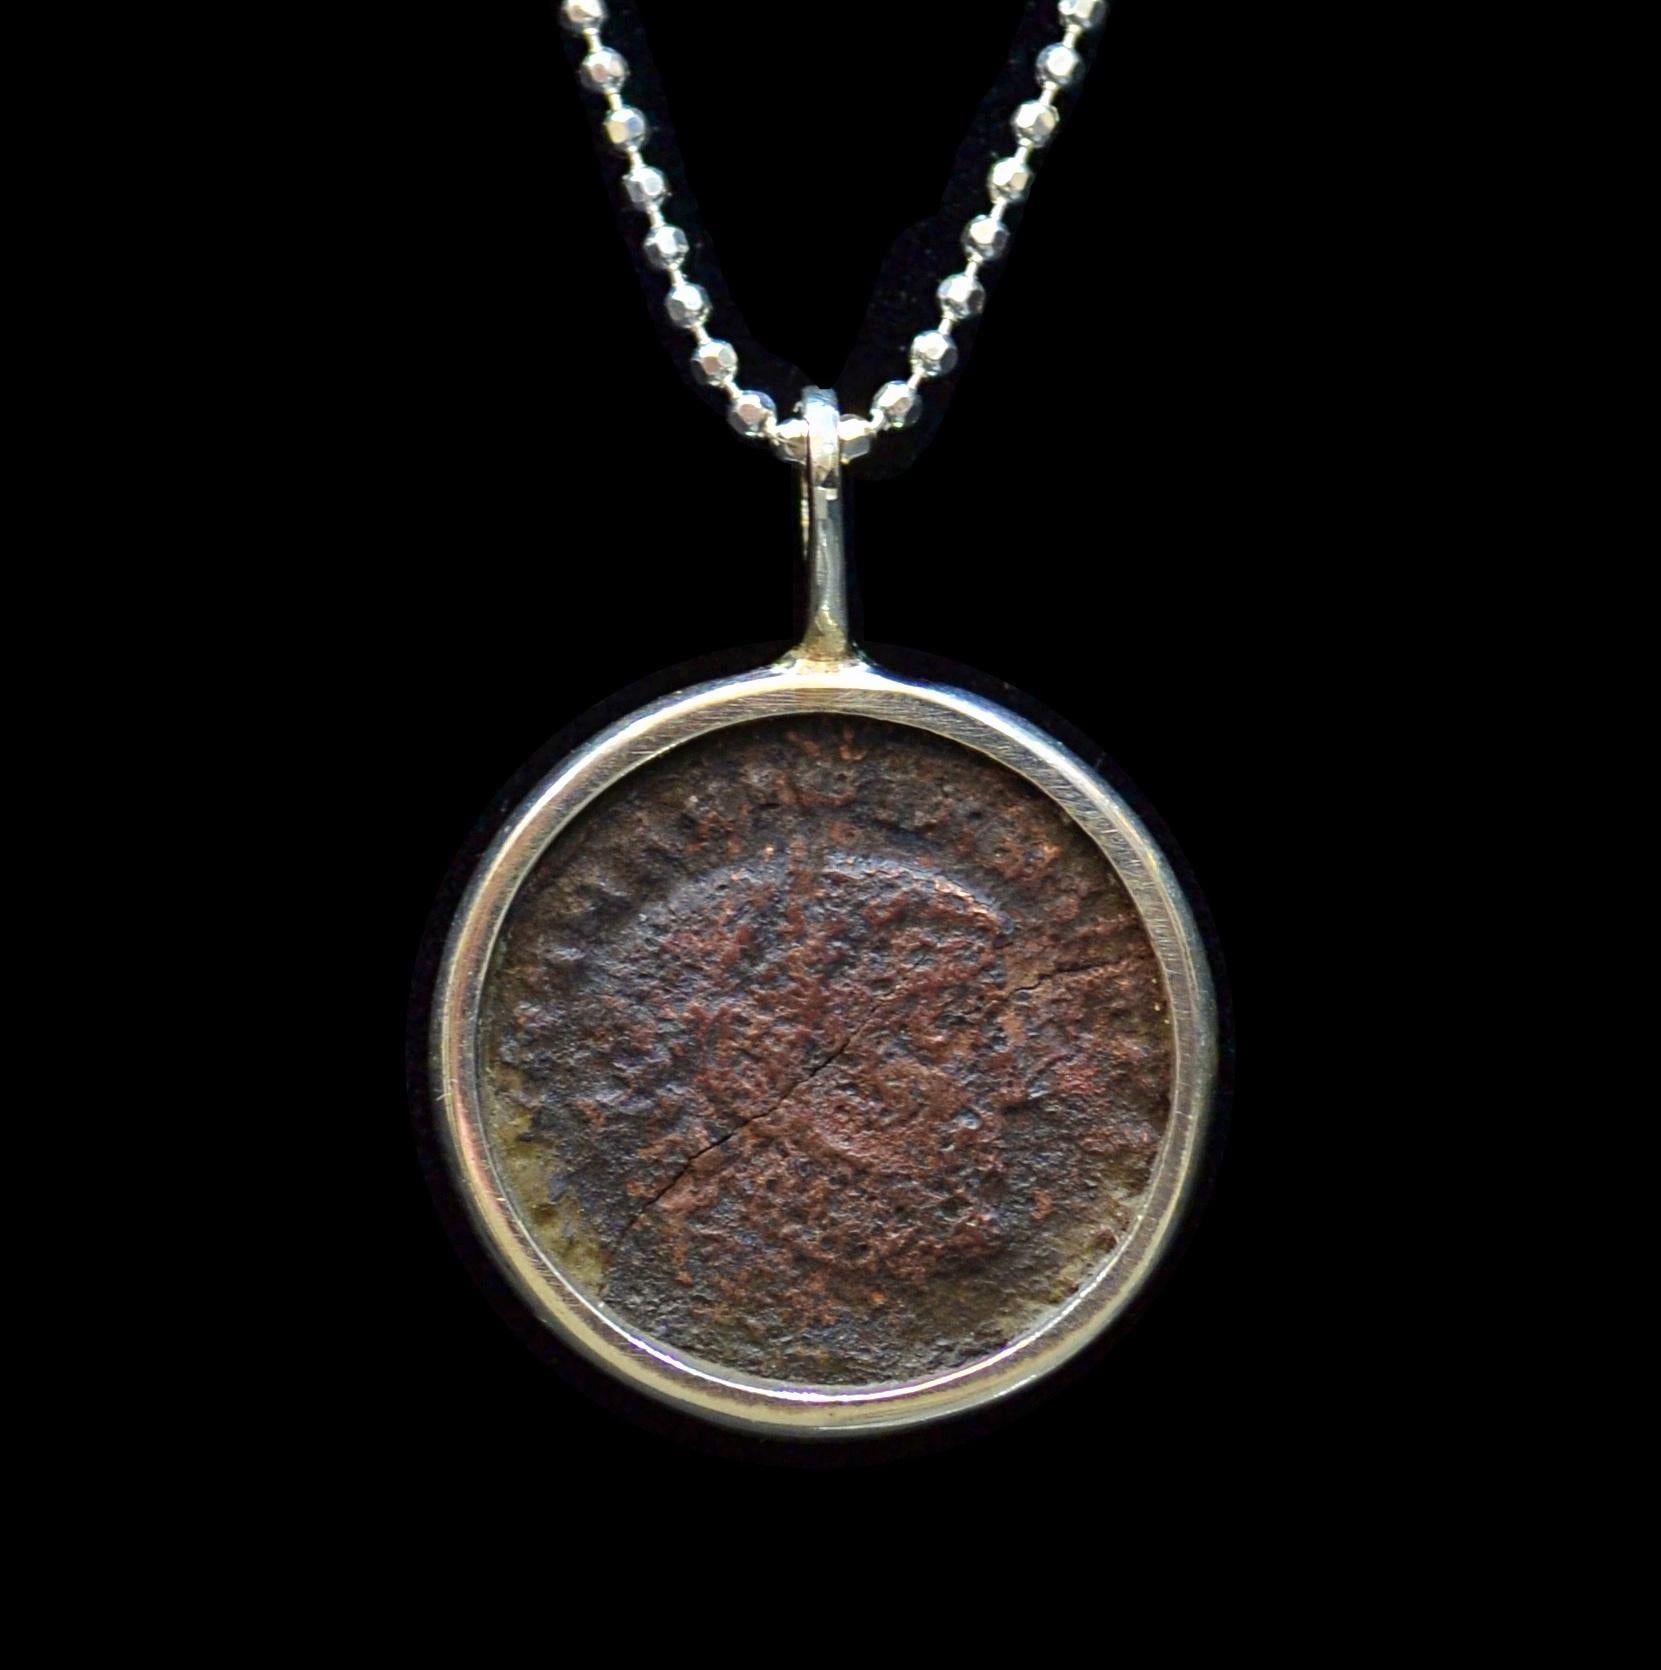 Antique roman bronze coin mounted on contemporary silver necklace. Ready to be worn!

Maximianus, emperor of Rome from 286-305 AD

Caesar from 285 to 286, then Augustus from 286 to 305. He shared the latter title with his co-emperor and superior,